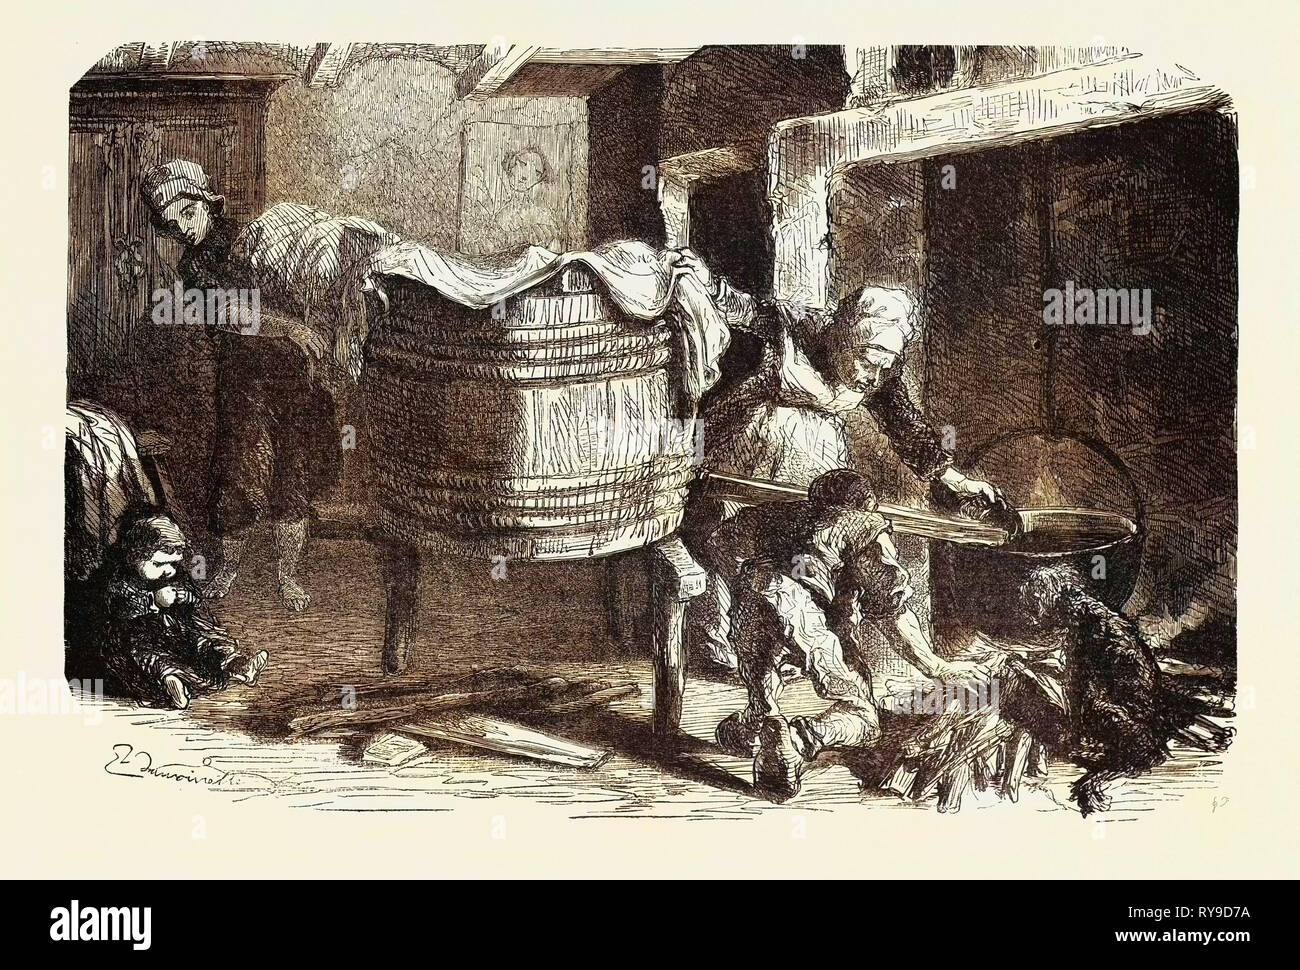 SCENES OF COUNTRY LIFE: The laundry. Studies by Damourette. engraving 1855 Stock Photo